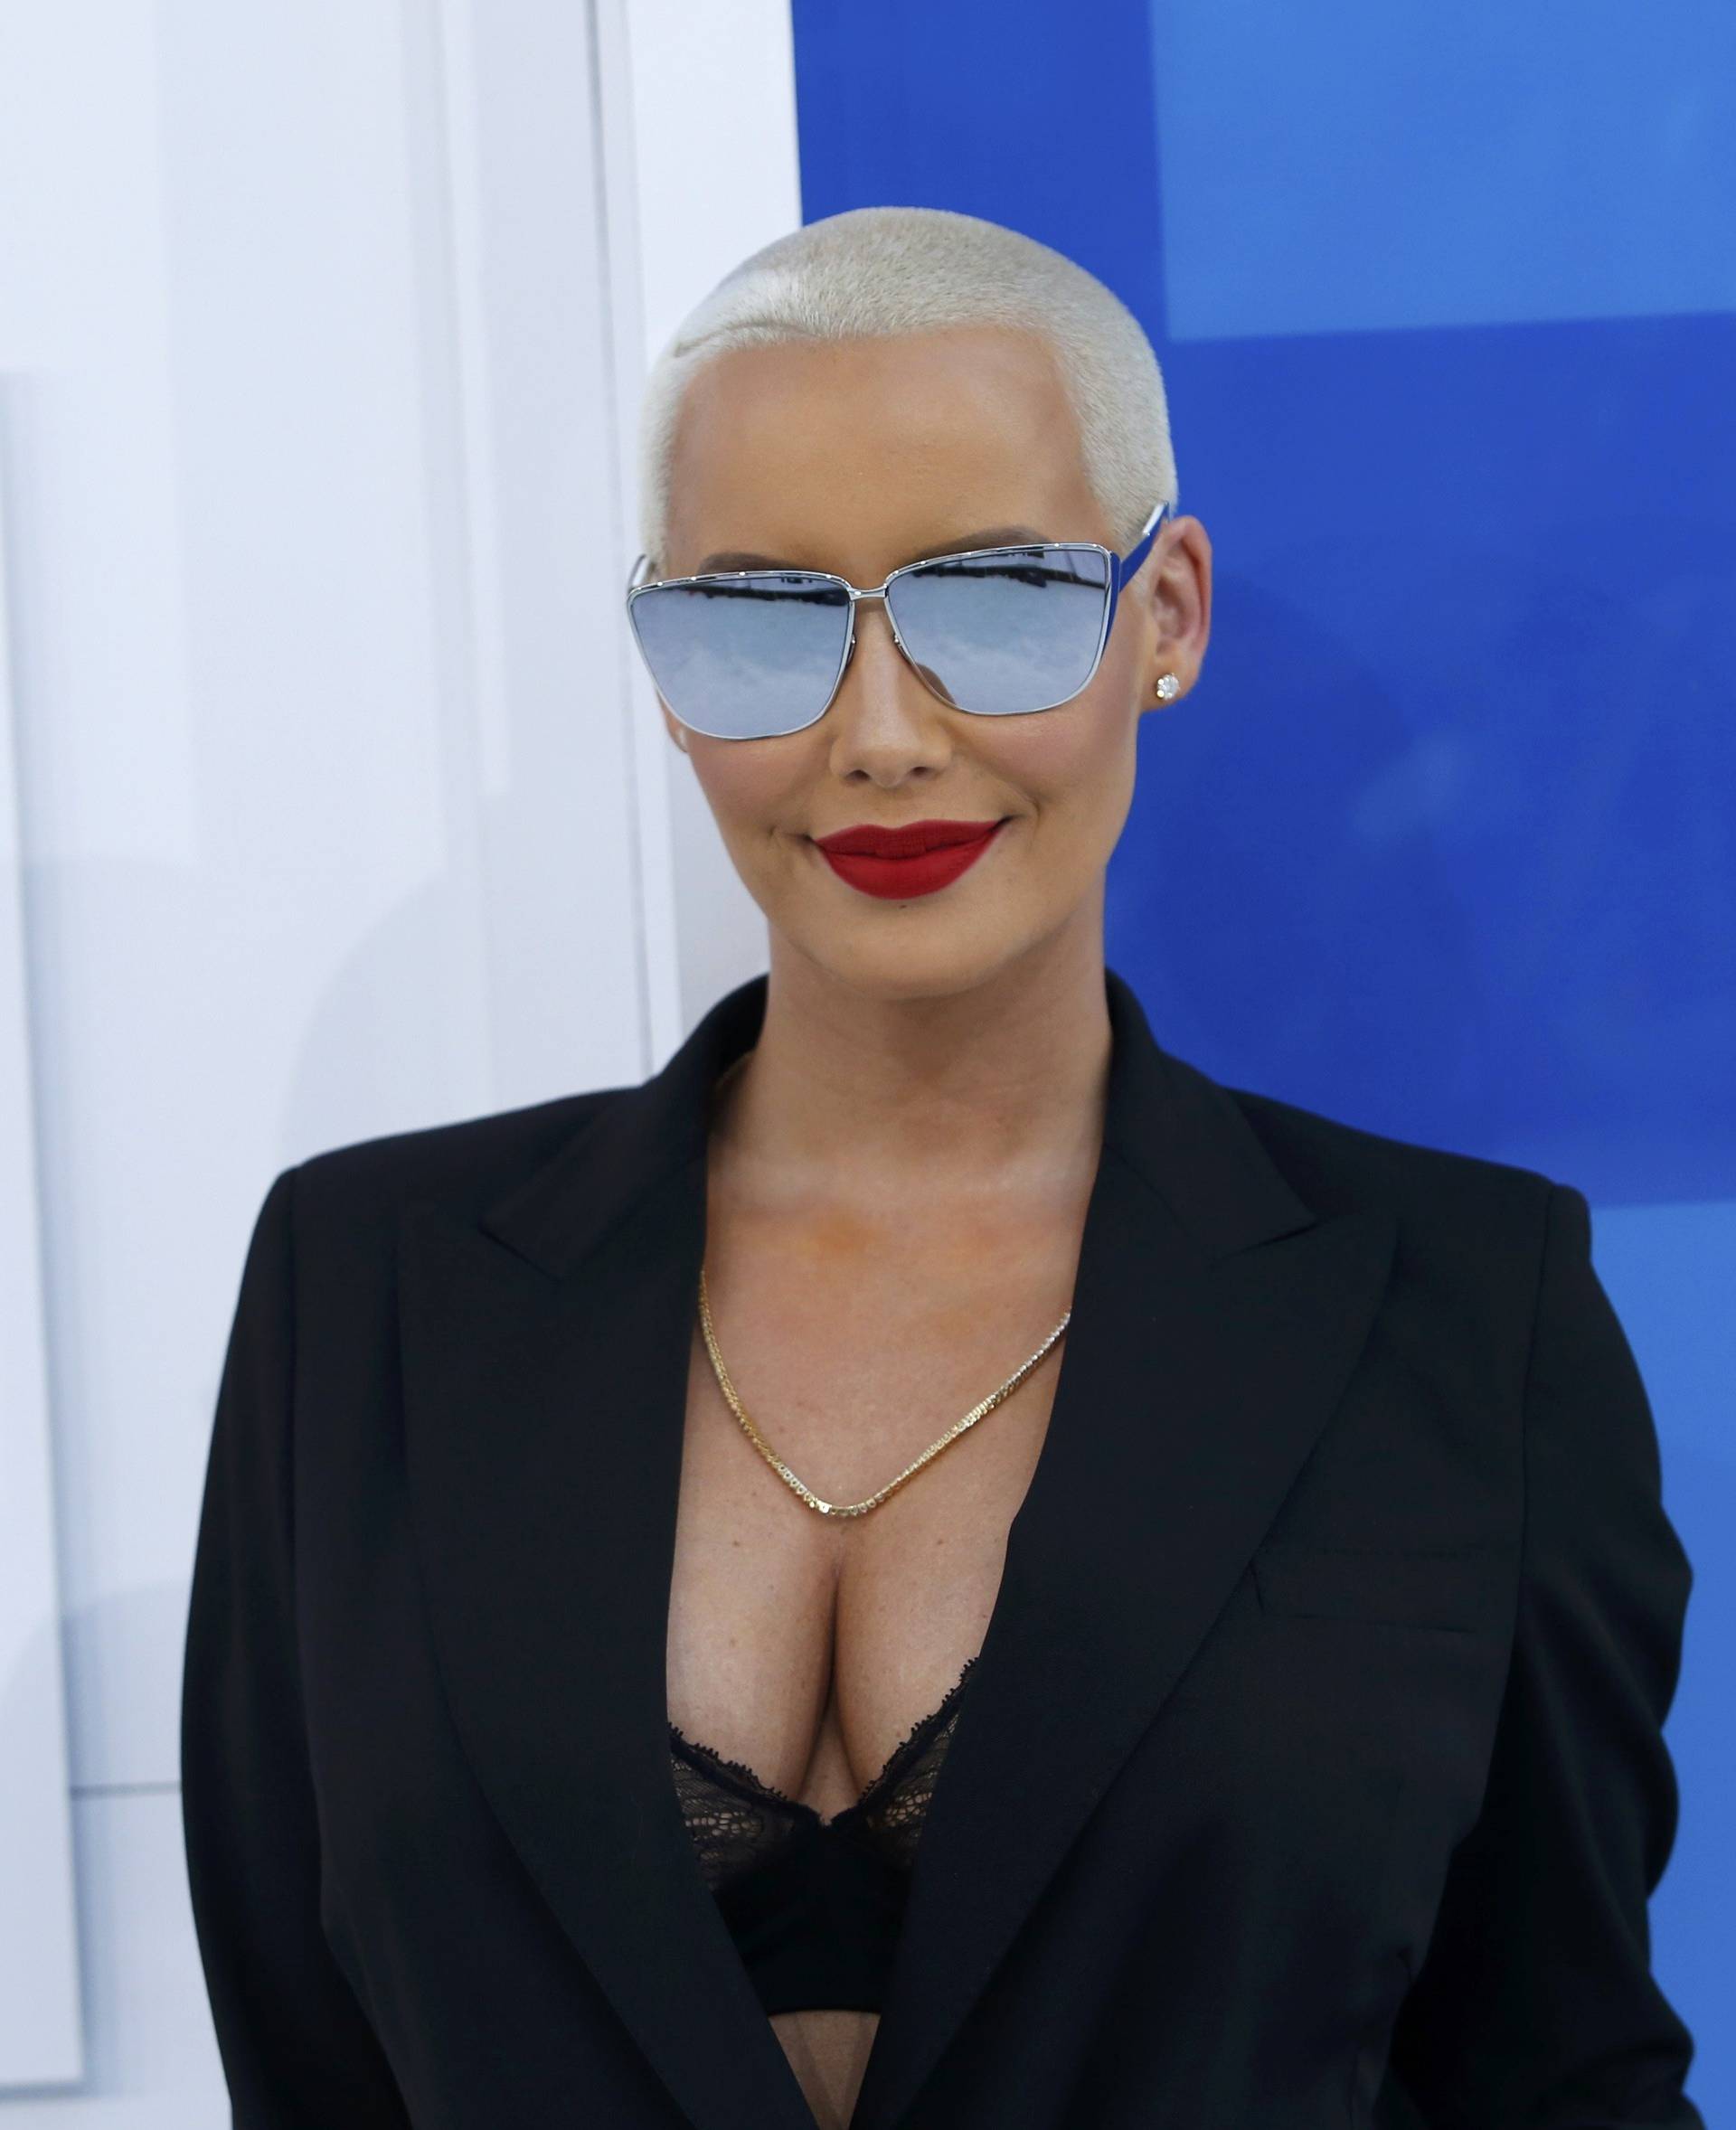 Amber Rose arrives at the 2016 MTV Video Music Awards in New York